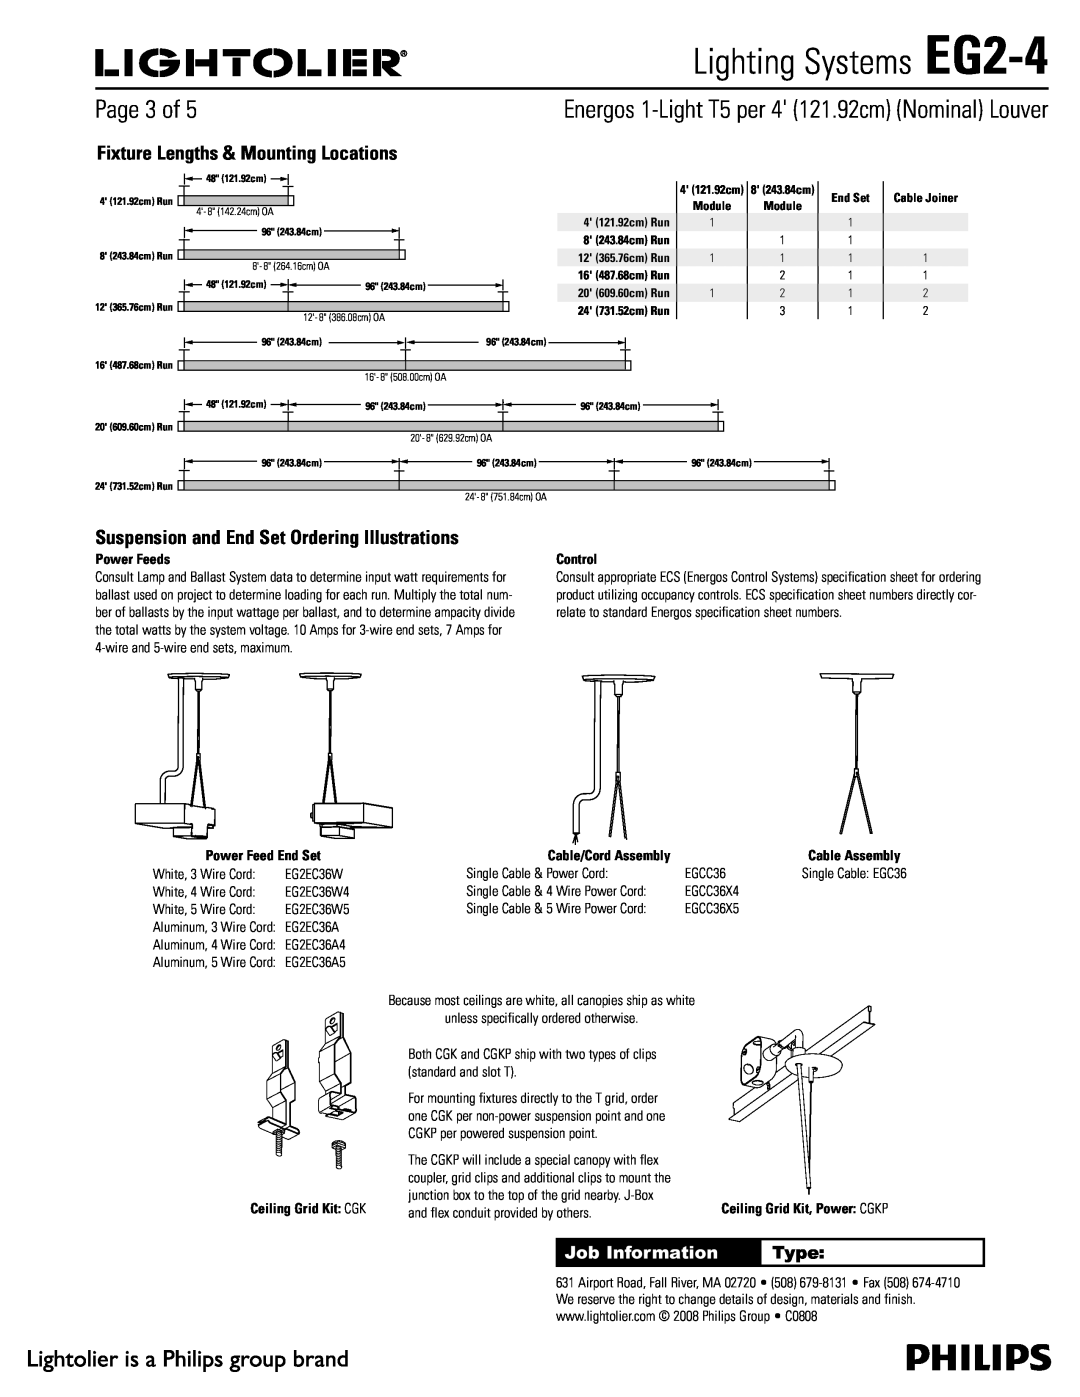 Lightolier Lighting Systems EG2-4, 1BHFPG, Job Information, Type, End Set, Cable Joiner, Cable/Cord Assembly 